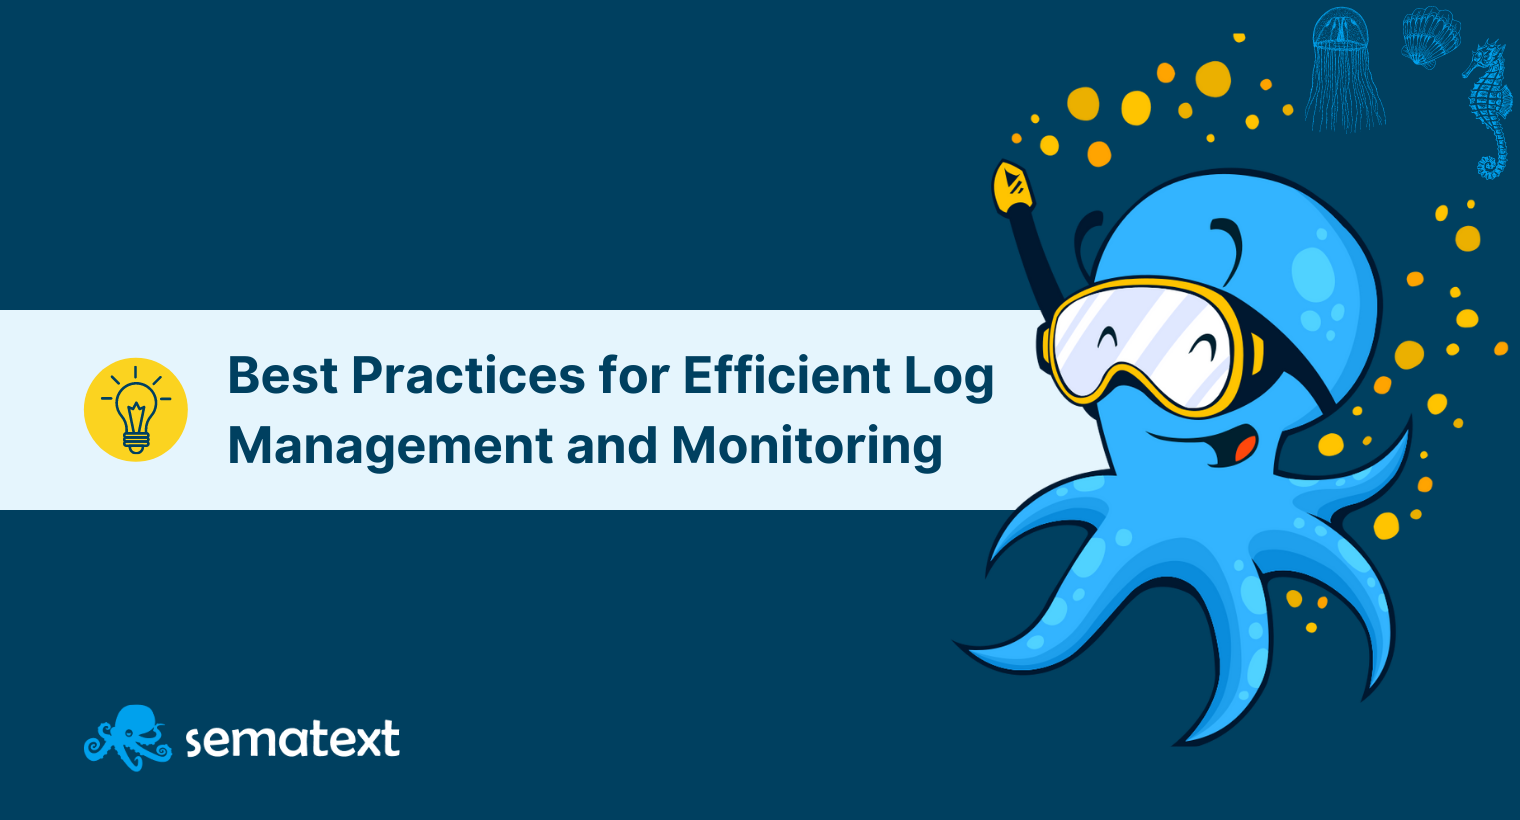 10+ Logging and Monitoring Best Practices and Standards for Efficient Log Management